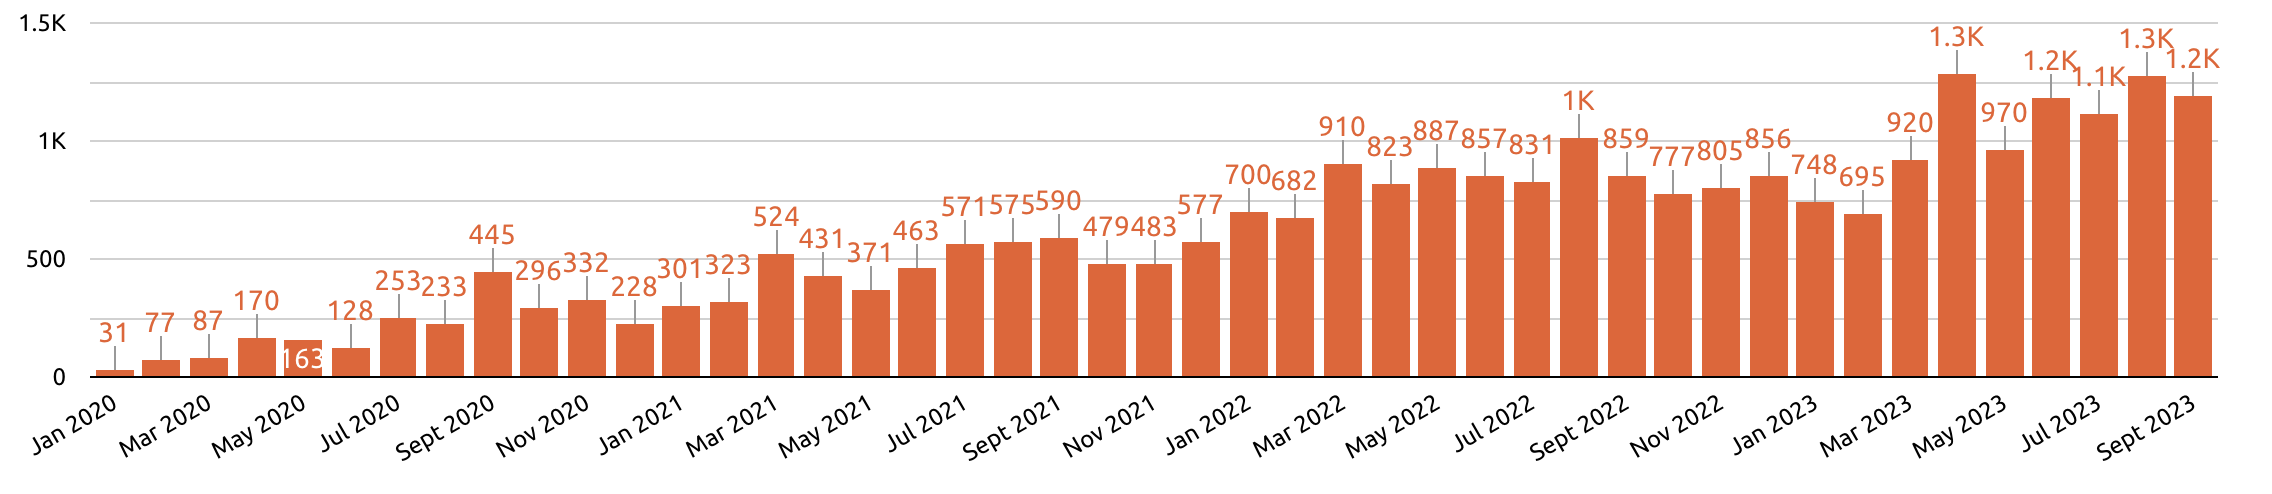 graph showing amount of evaluations added to Sciety per month